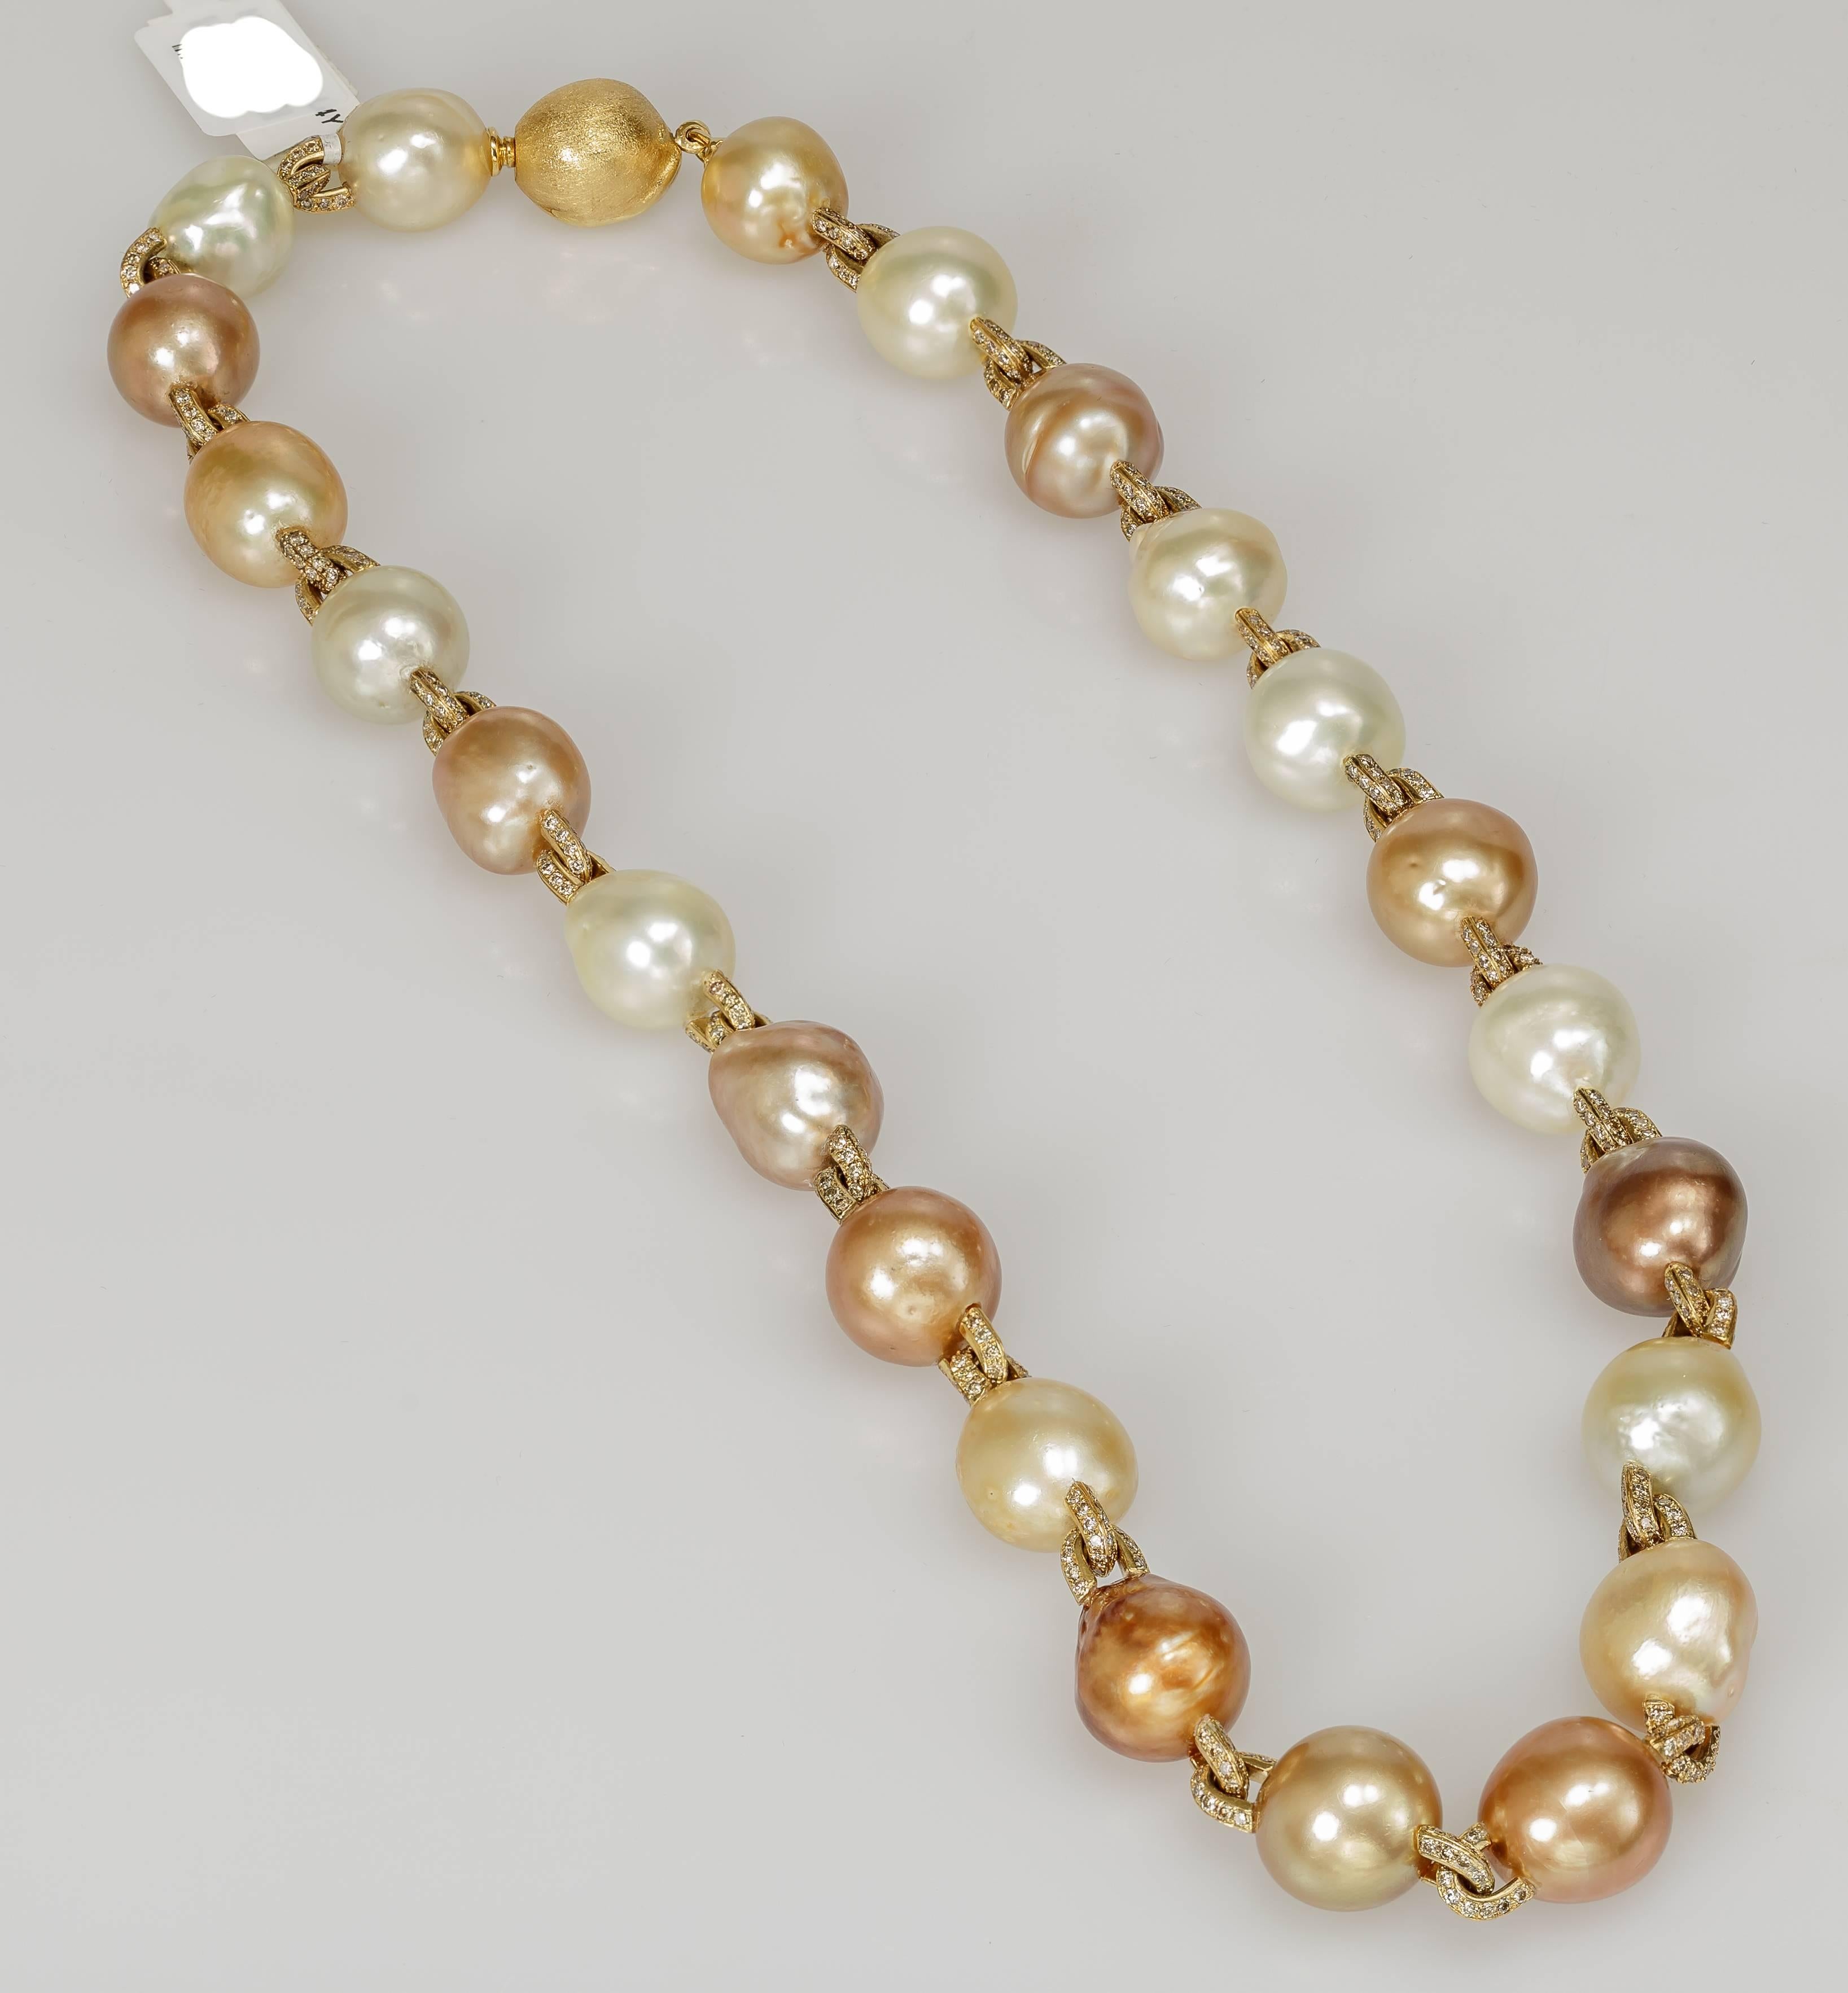 This Yvel necklace features baroque pearls linked with 18k yellow gold to make an 18 inch long strand. The links are set with diamonds totaling 4.14 ct.